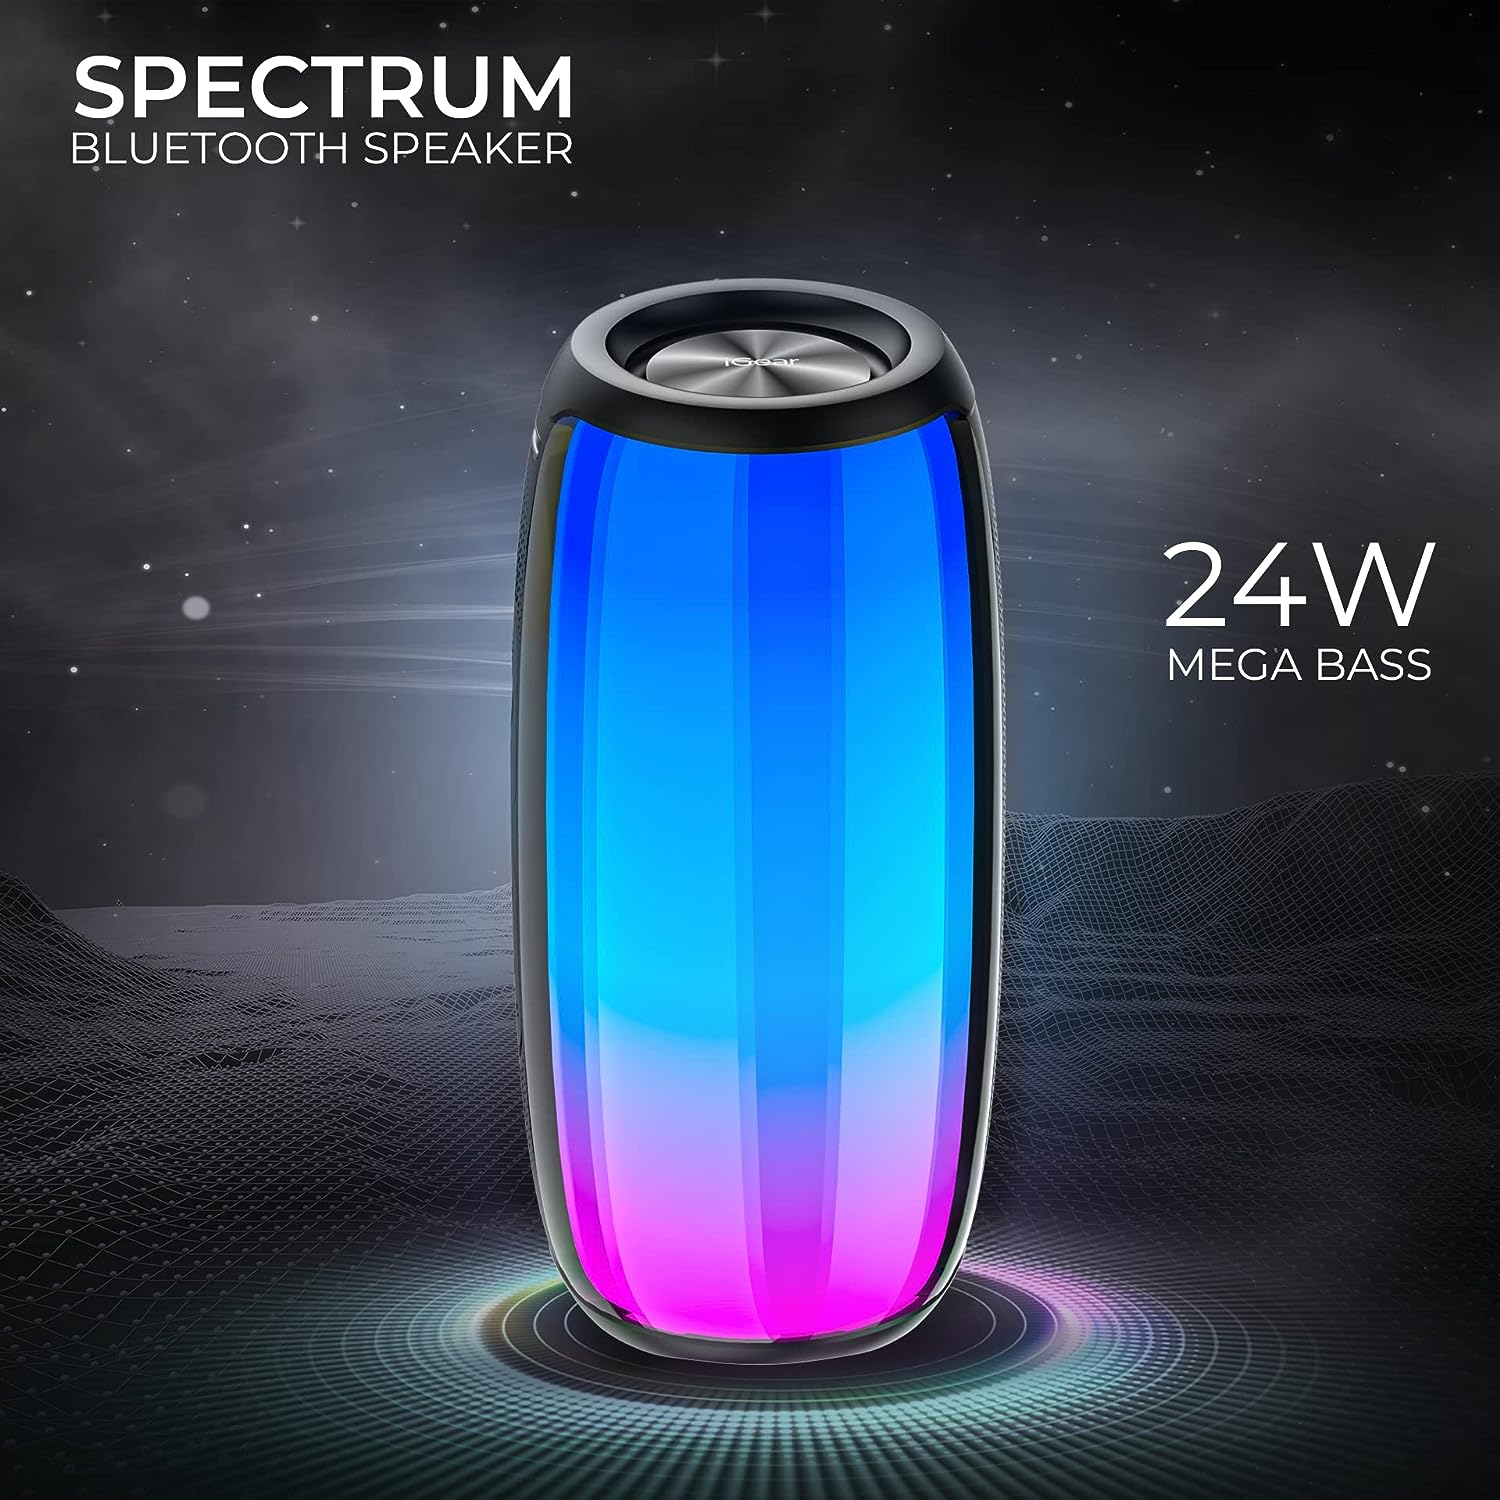 iGear Spectrum Portable Bluetooth Party Speaker with 180 Degree LED Light Show, 15 Hours of Playtime, TWS, IPX5 Rating and 360 Degree Surround Sound